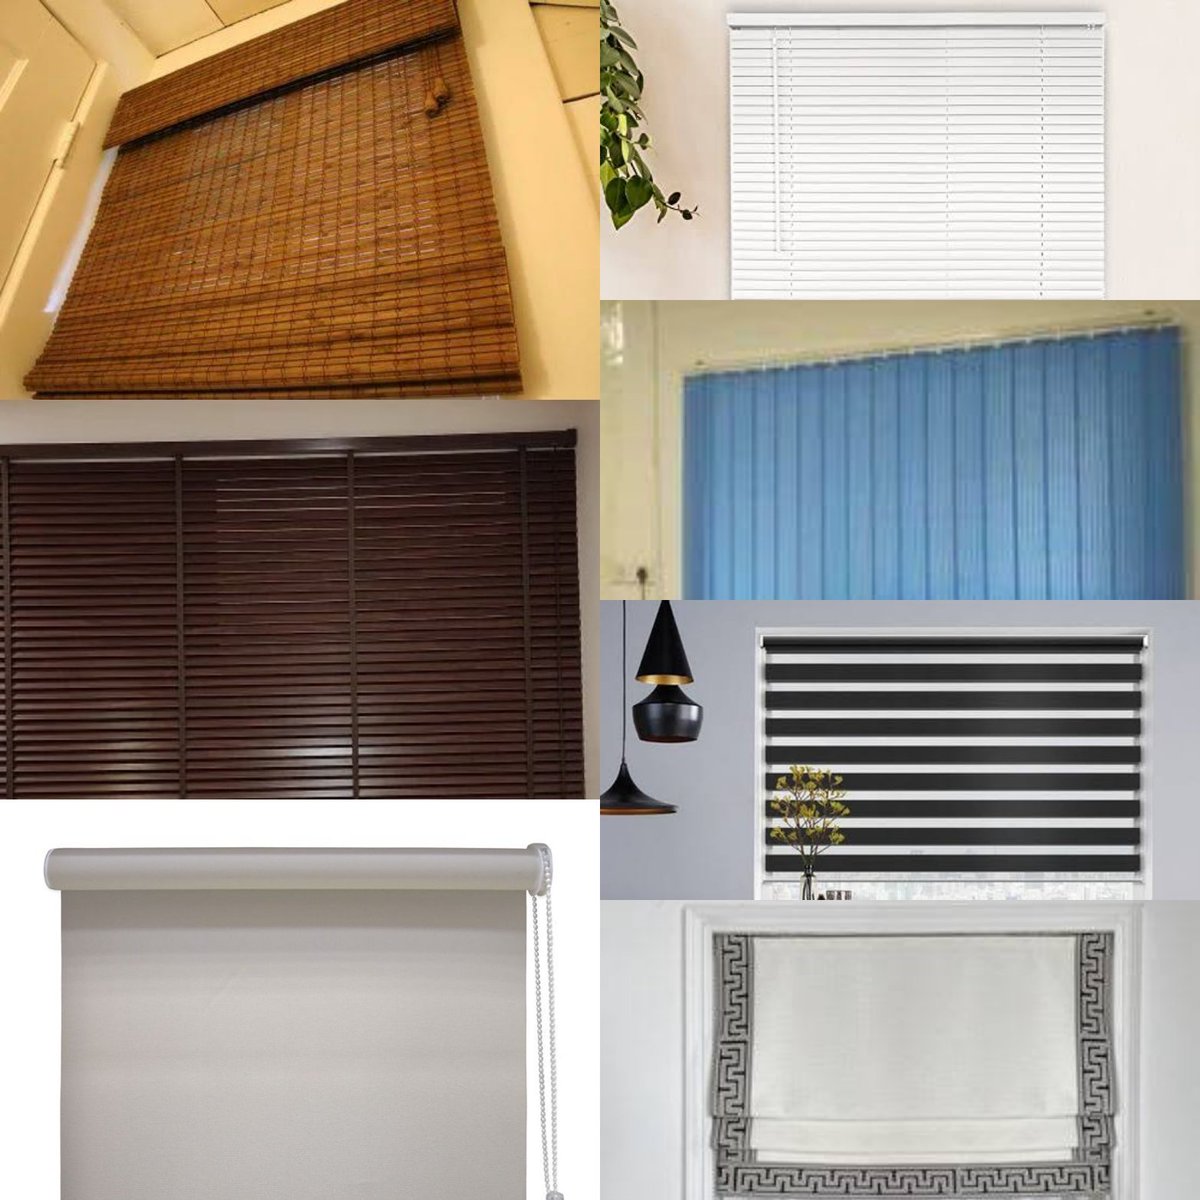 Zainab interiors have variety of blinds such as zebra blinds, roller blinds, venetian blinds, vertical blinds etc

Call or WhatsApp:03212388618

#rollerblinds #zebrablinds #venetianblinds #verticalblinds #chickblinds #romanblinds#fabricvenetionblinds#

we also deal in :
window b